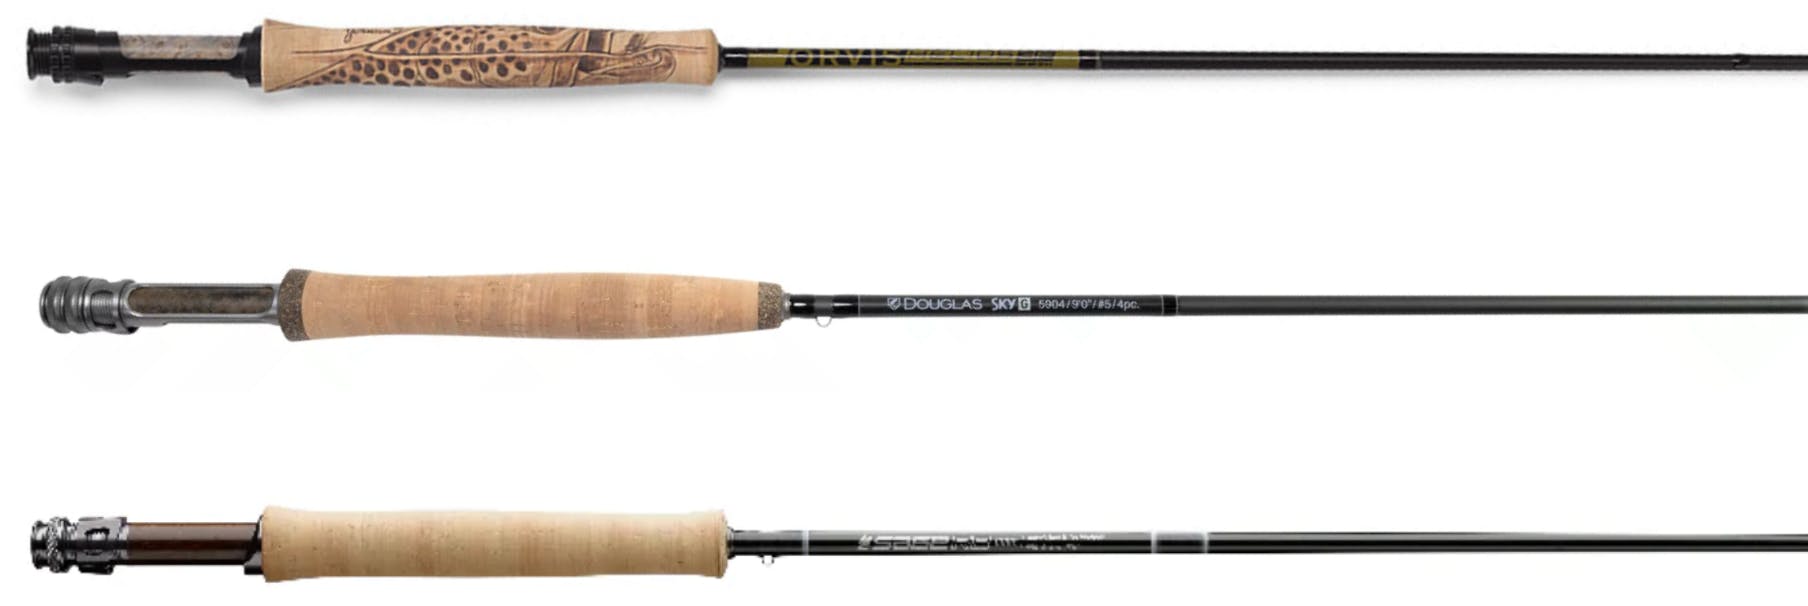 Three fly rods. From top to bottom - the Orvis Helios 3F, the Douglas SKY G, and the Sage R8 Core.